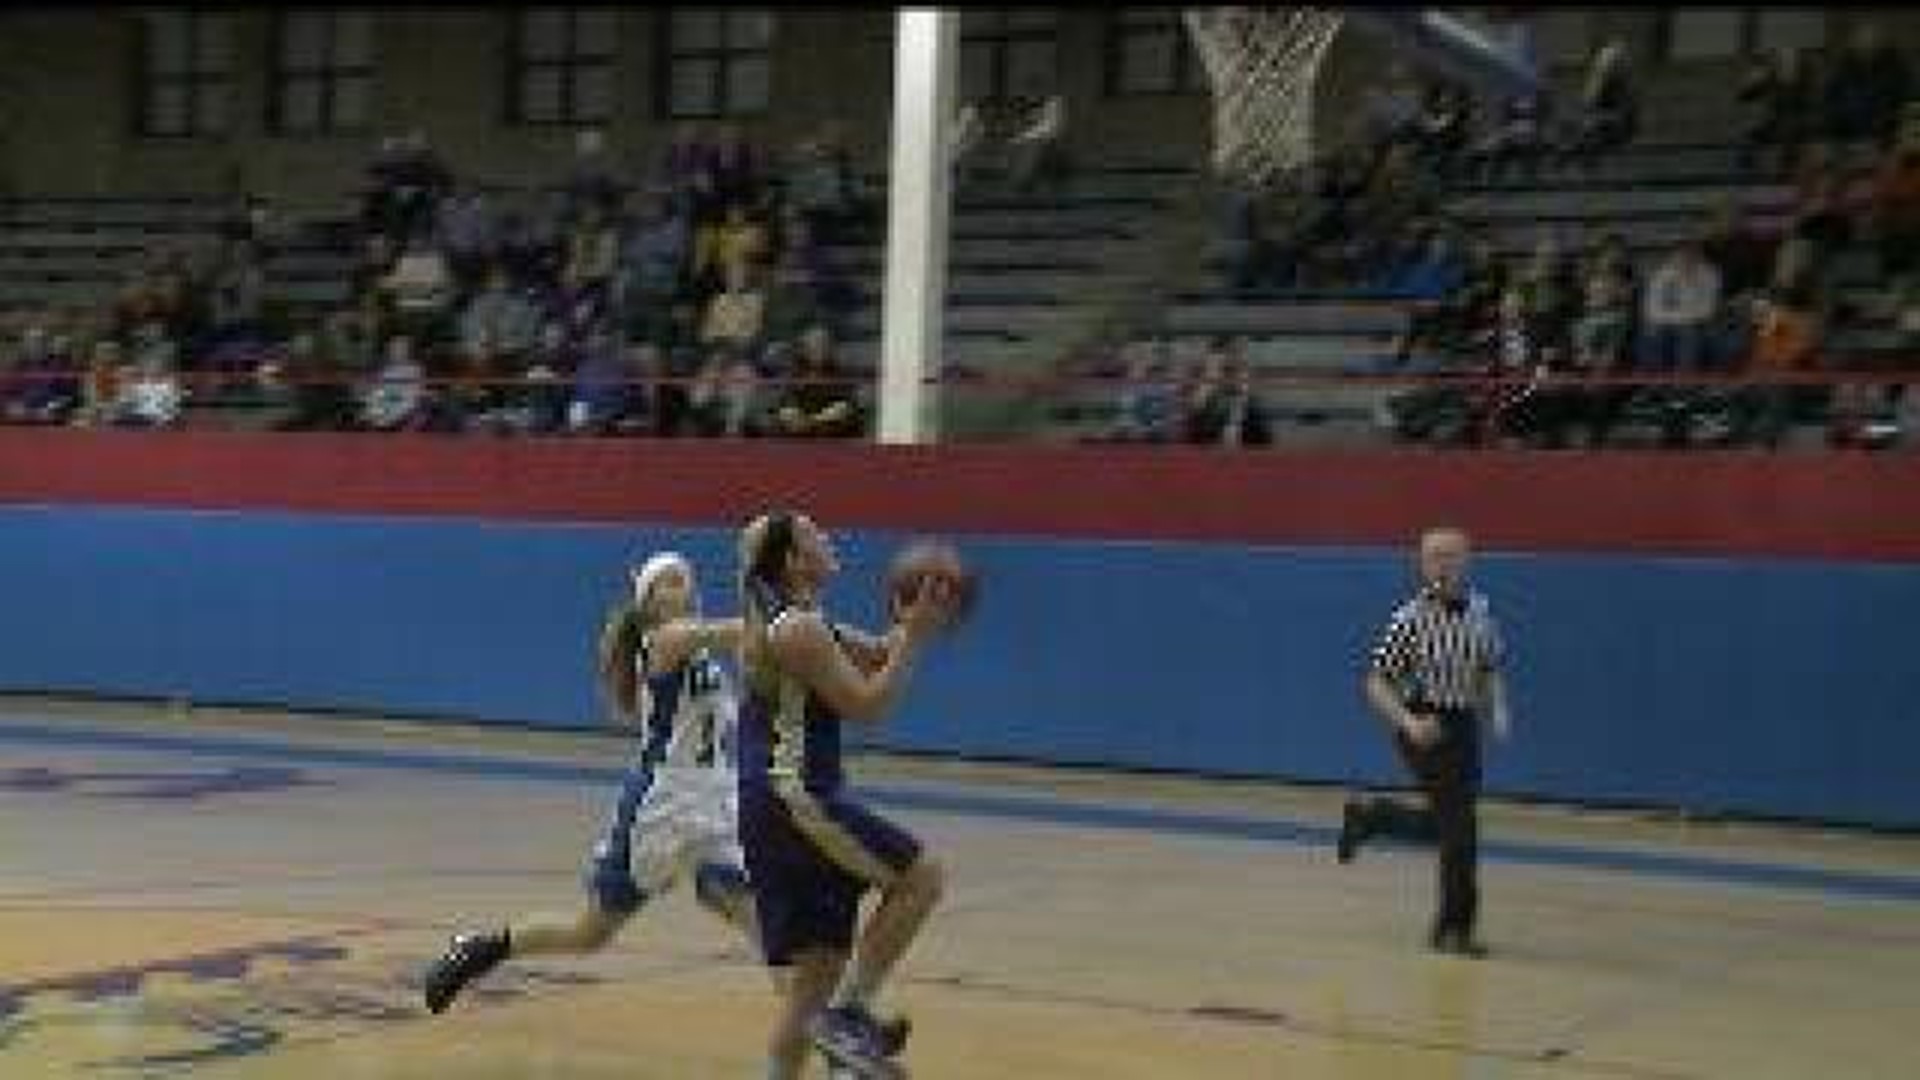 Clemens Leads Muskies to Victory